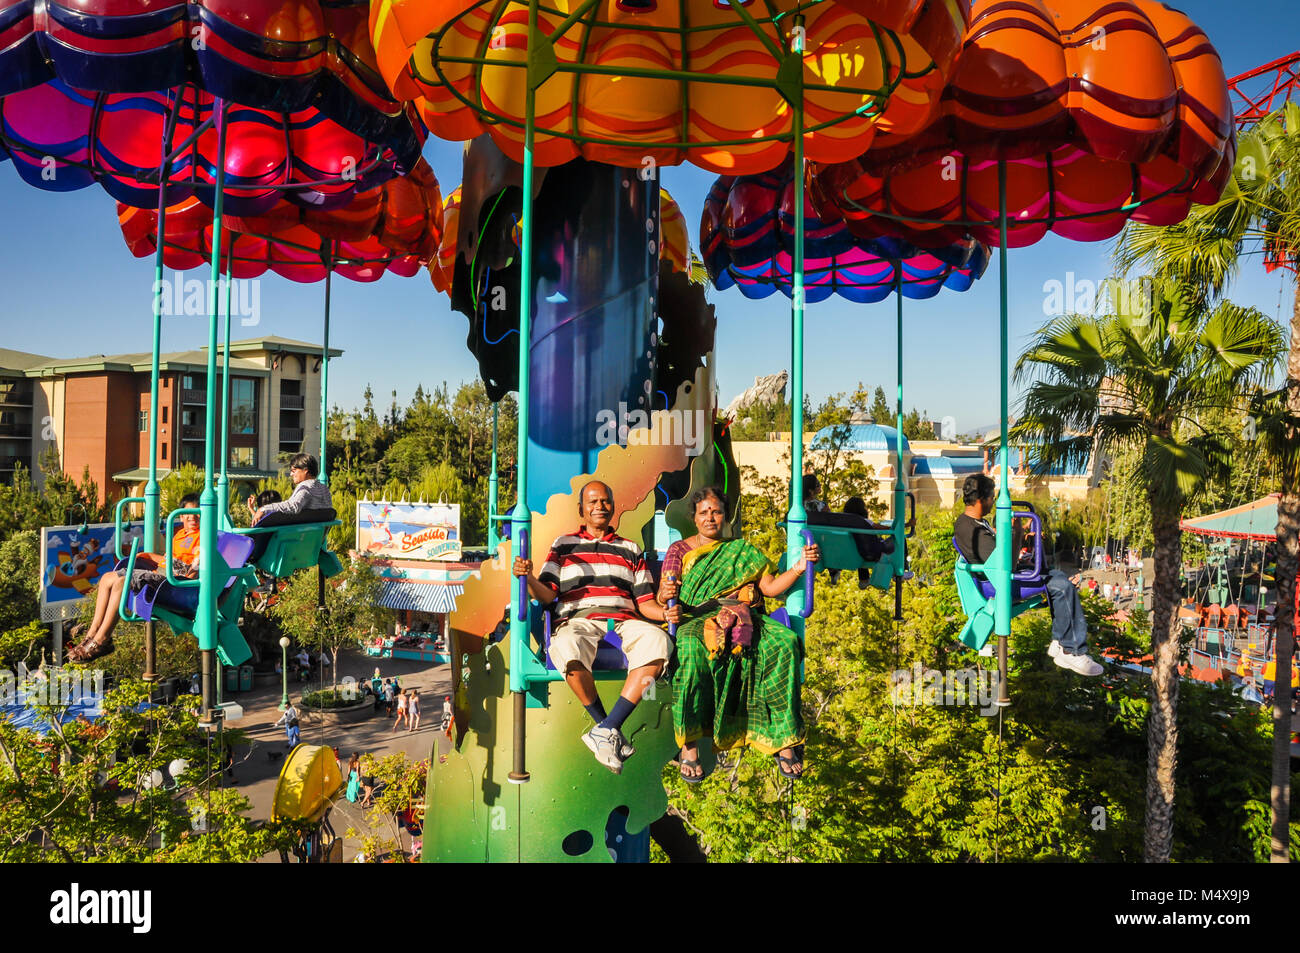 Indian couple, the woman dressed in a green sari, ride the Jumpin' Jellyfish paratower parachute ride at Disneyland in California. Stock Photo